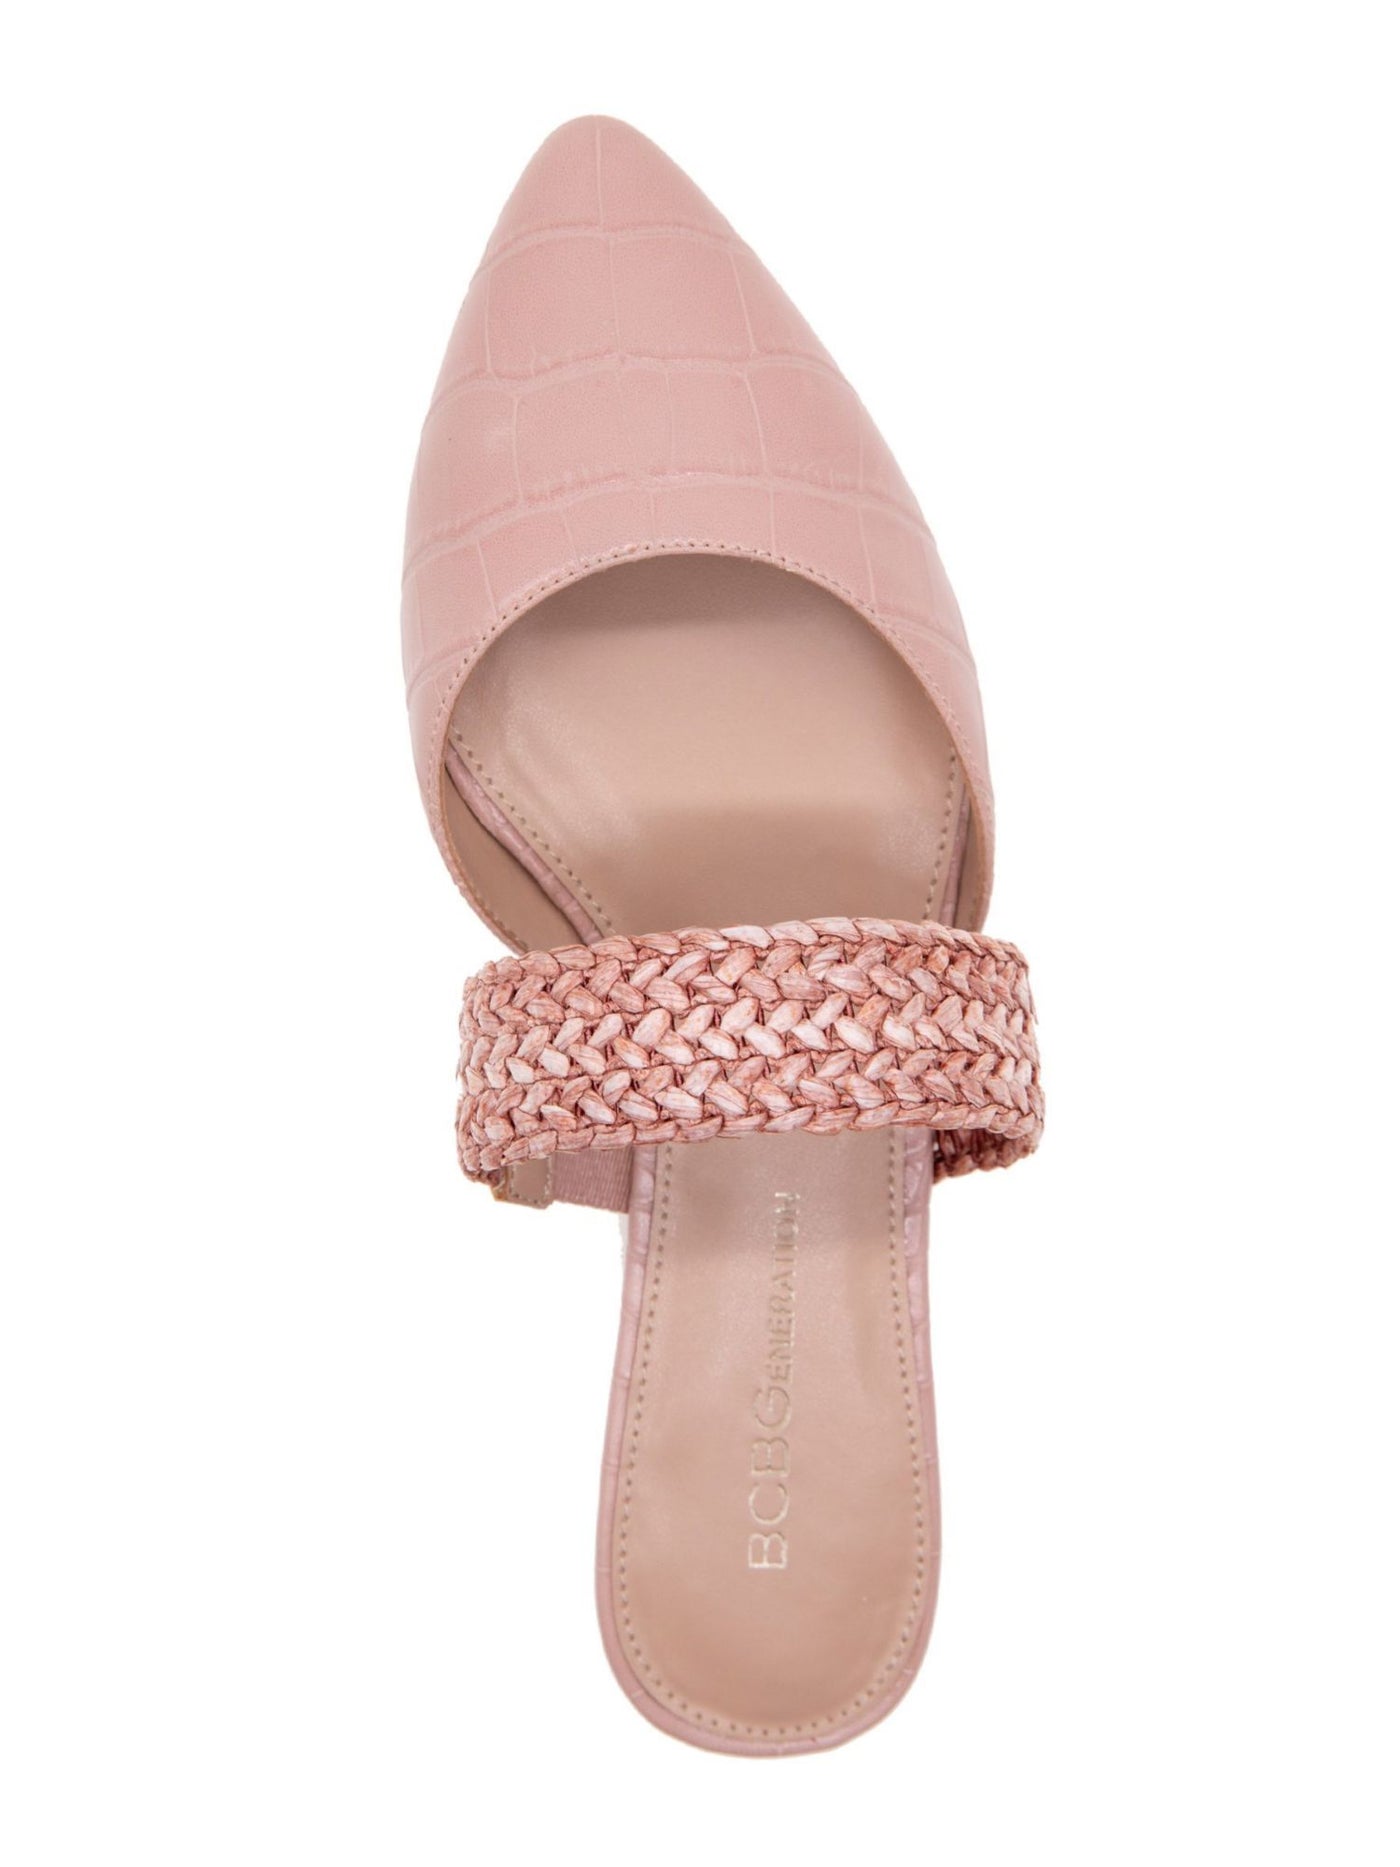 BCBGENERATION Womens Pink Mixed Media Braided Strap Flexible Outsole Goring Padded Emma Pointy Toe Slip On Mules 7 M